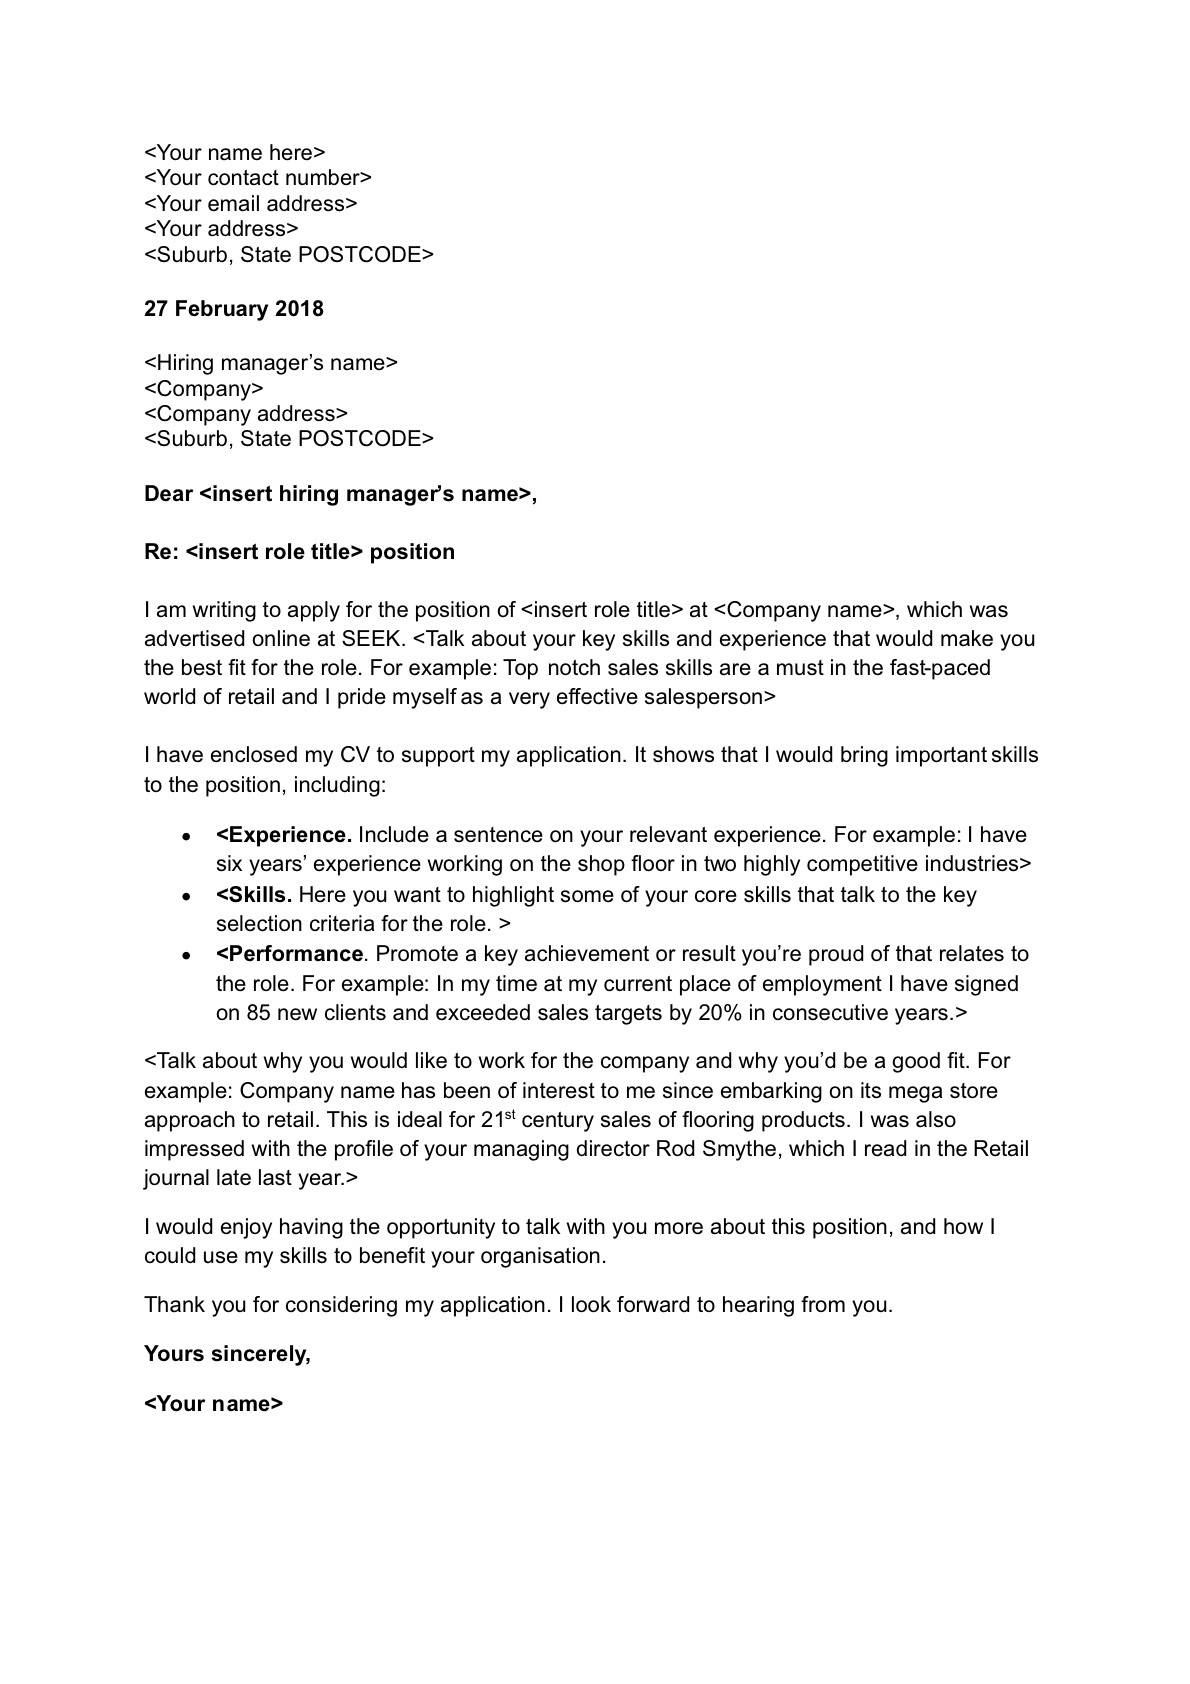 Formal Cover Letter Template from seekconz.corewebdna.net.au